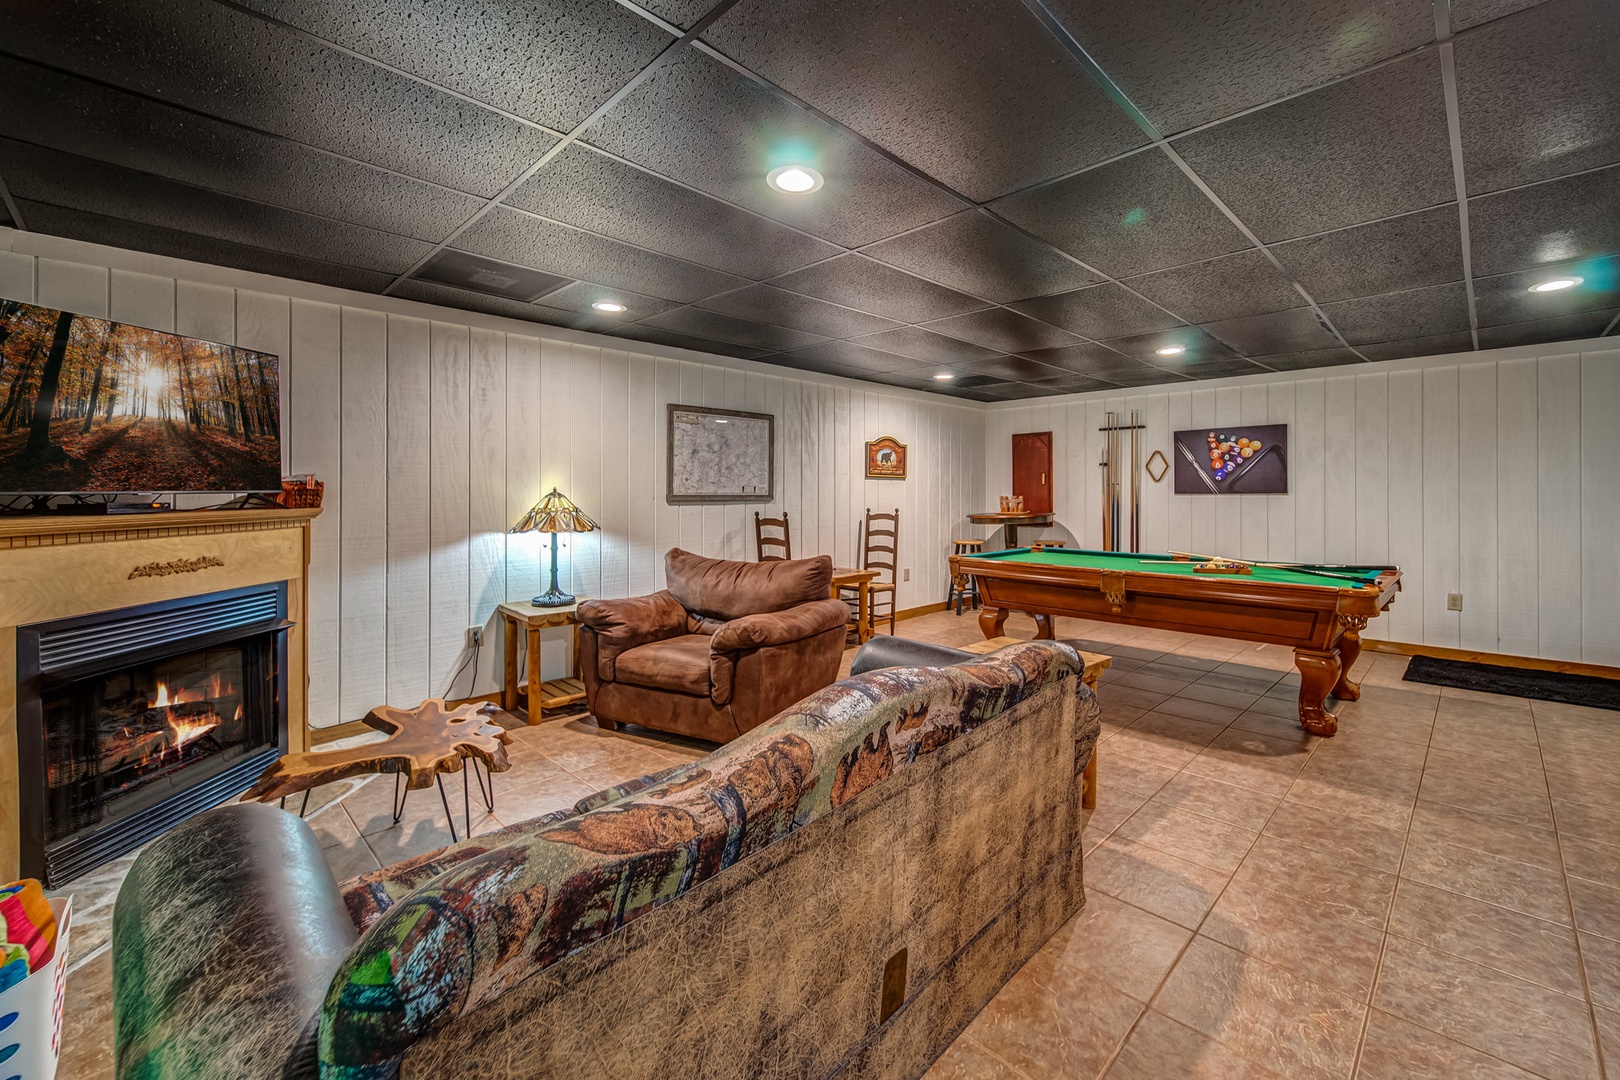 You may also retire to relax downstair, where there is another queen sized sleeper sofa.  Enjoy a round of pool, darts, board games, or bring your gaming console for endless gaming